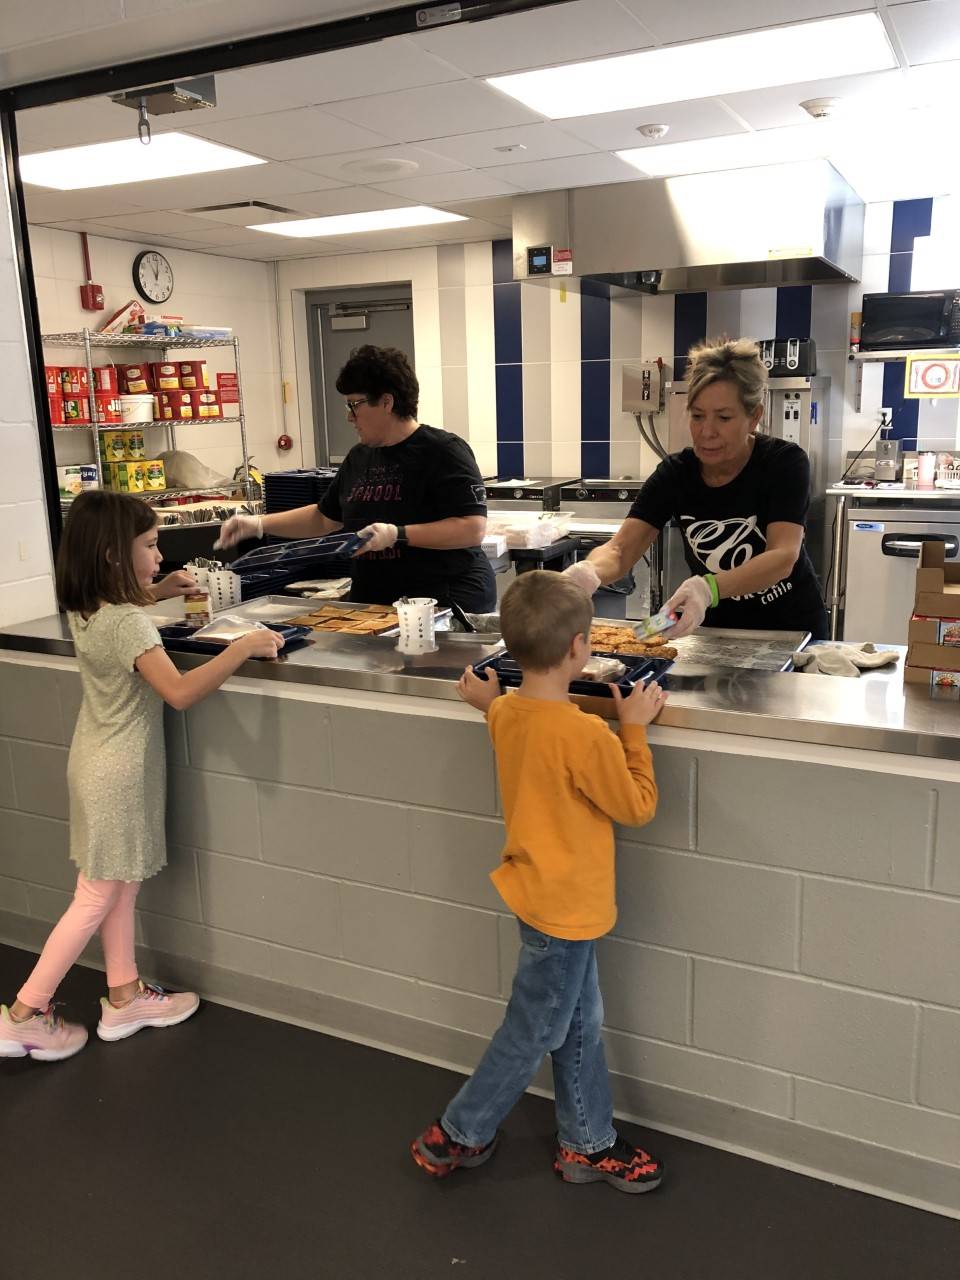 CES - Food Service serving lunch